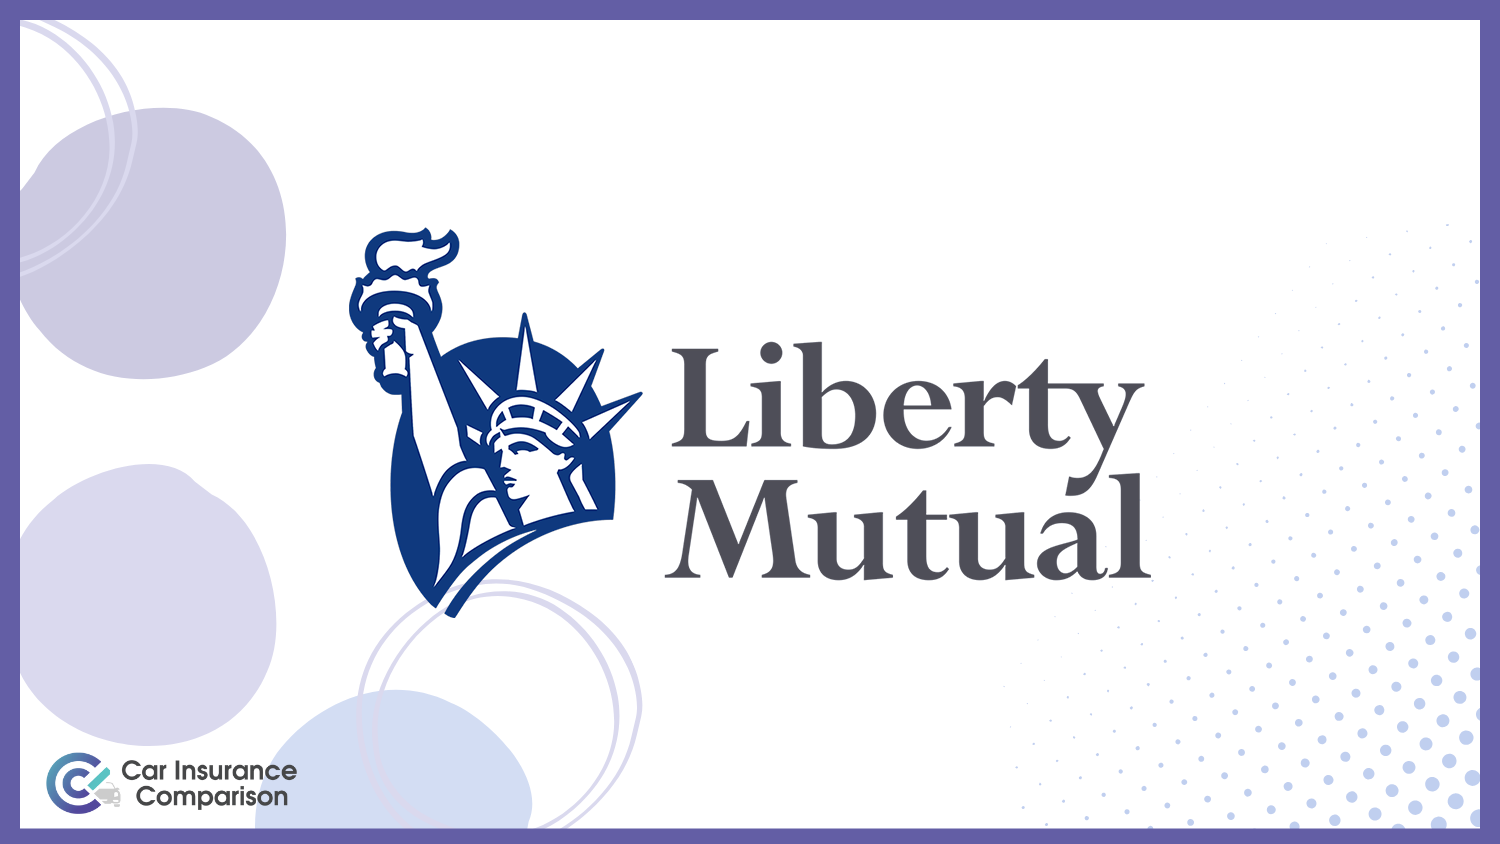 Liberty Mutual: 10 Best Companies for Bundling Home and Car Insurance